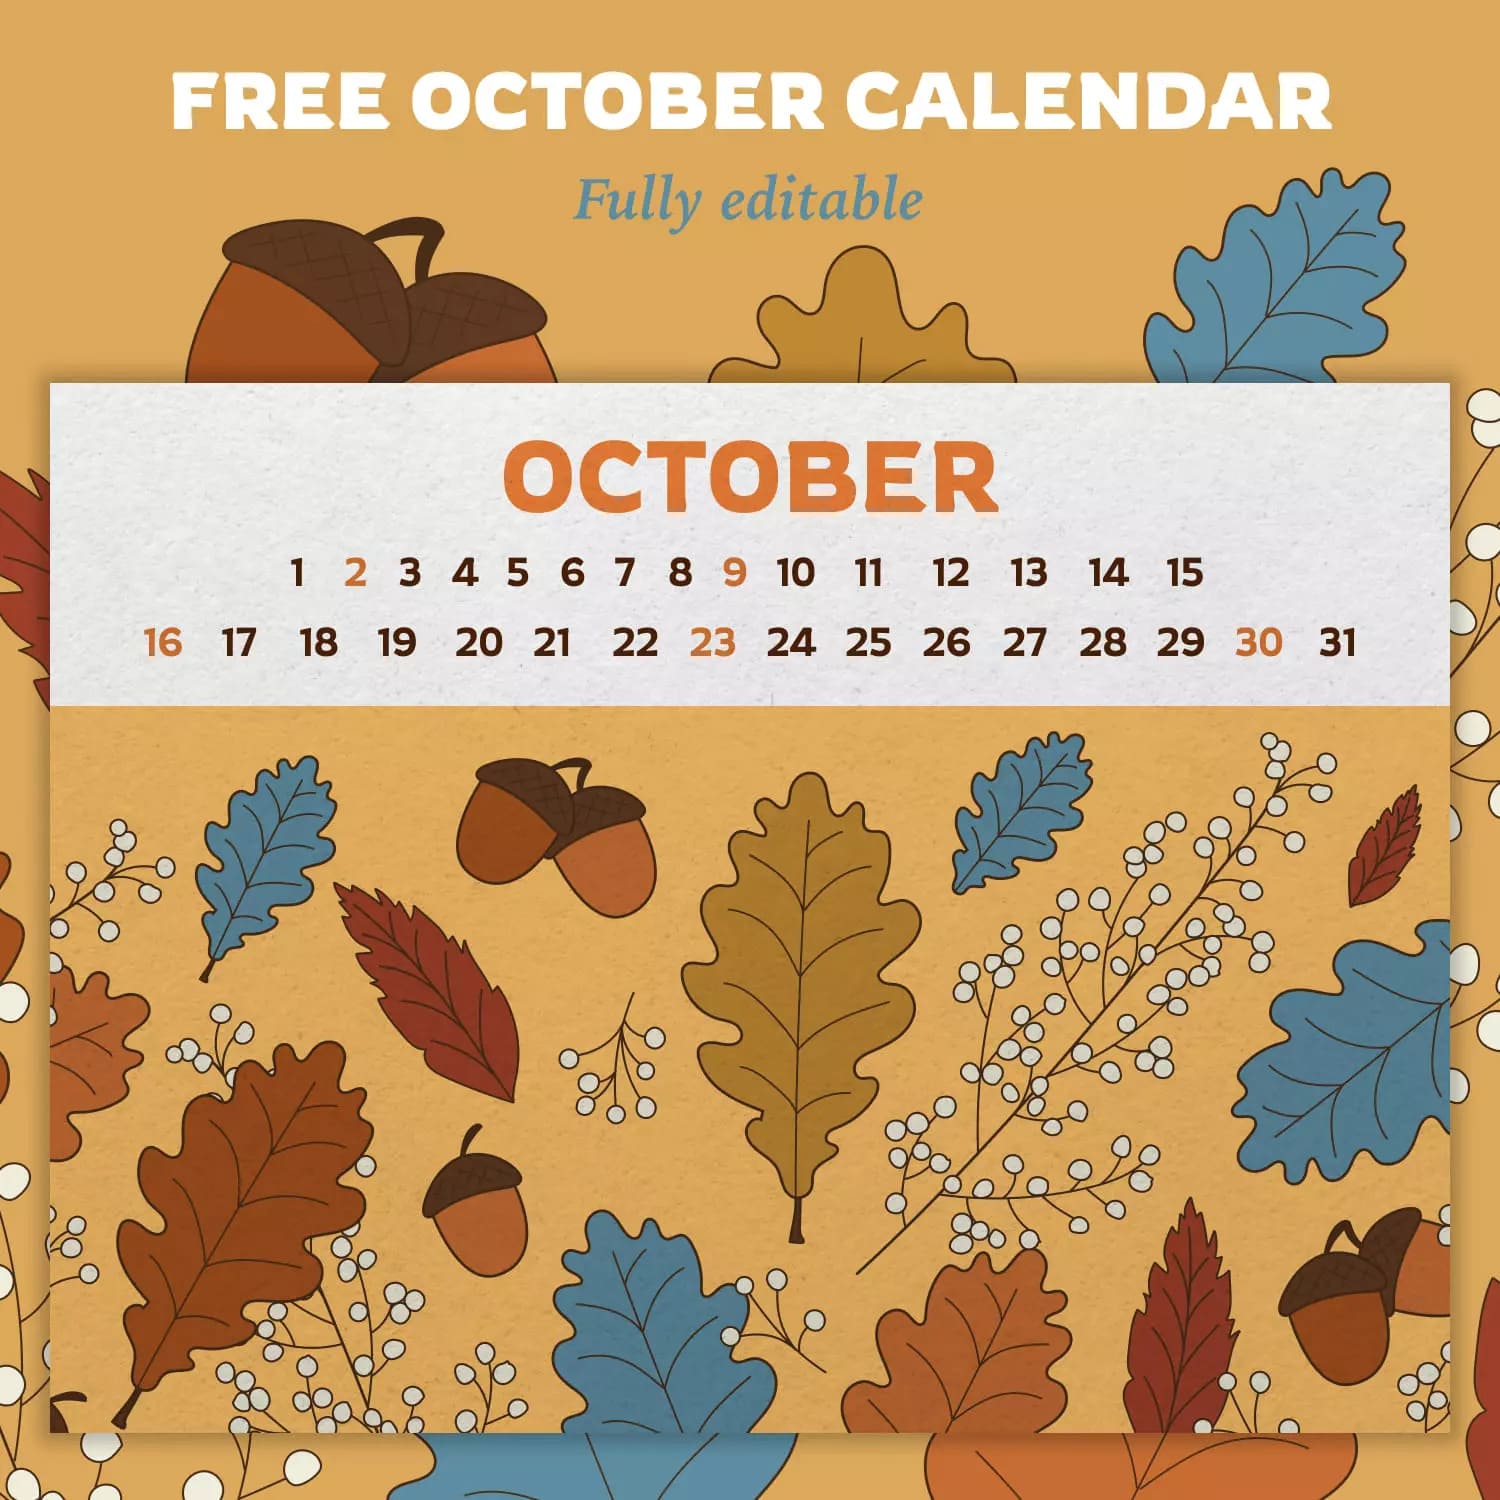 Free Editable Calendar October Acorns And Leaves Preview.